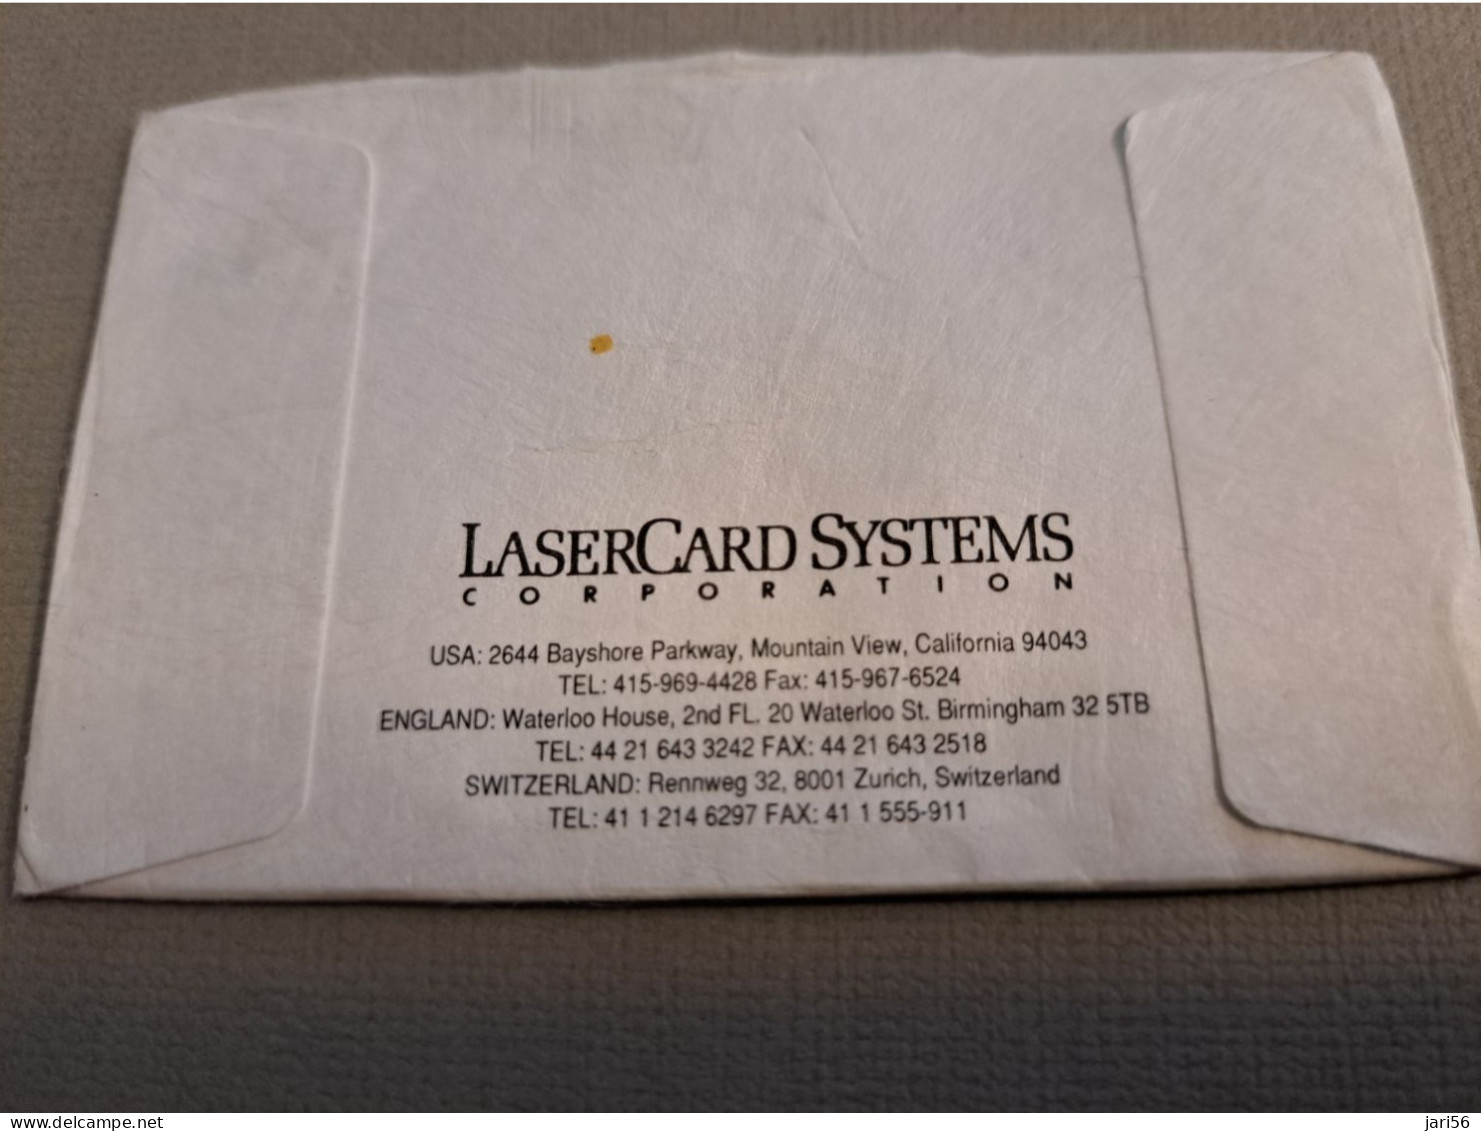 UNITED STATES USA AMERIKA /LASERCARD/ OPTICAL MEMORY CARD/ SAMPLE/ VERY DIFFICULT TO FIND / OLDER CARD  / MINT**15829** - Amerivox